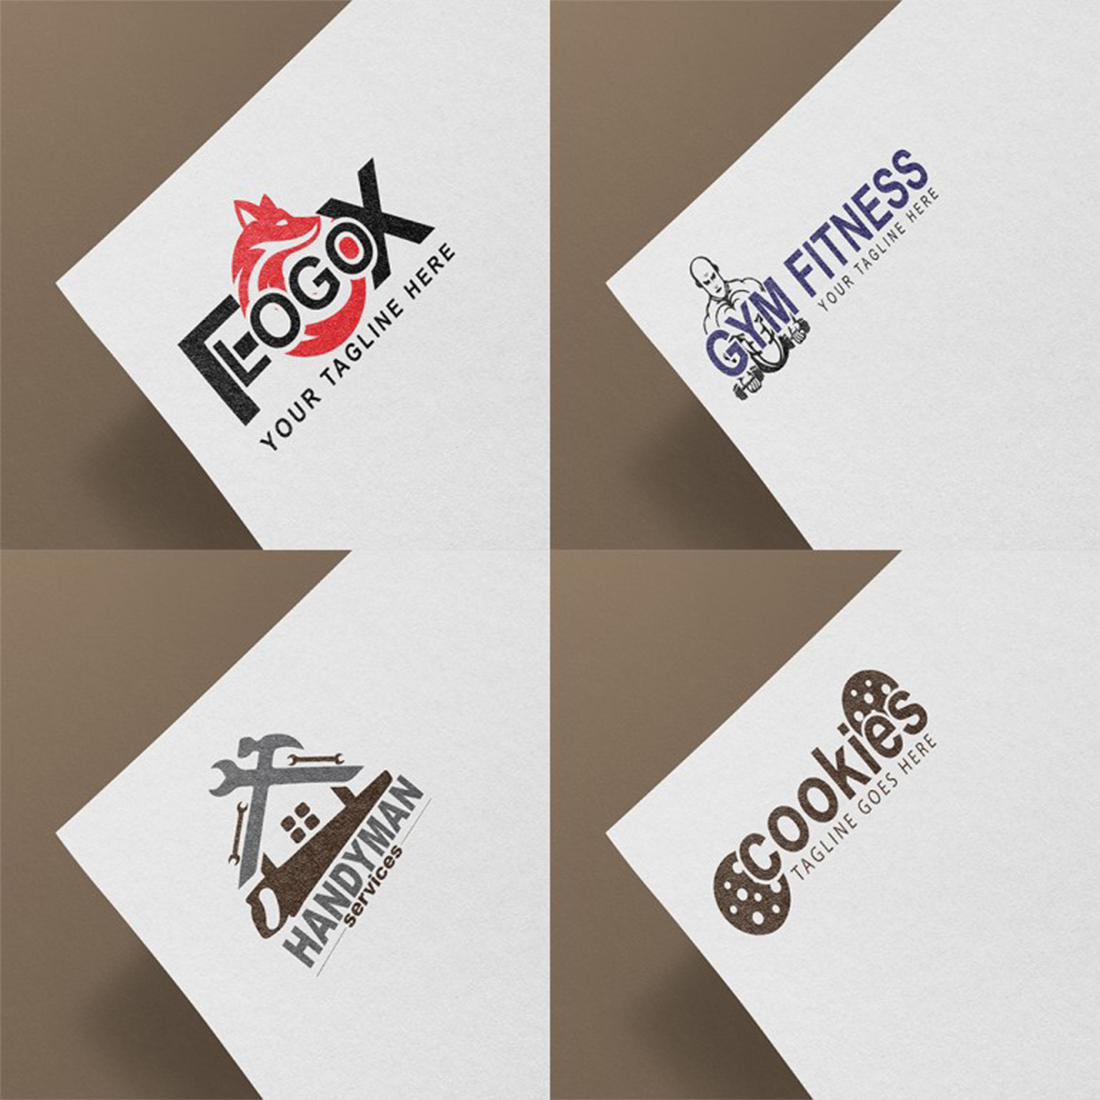 Four business cards with different logos on them.